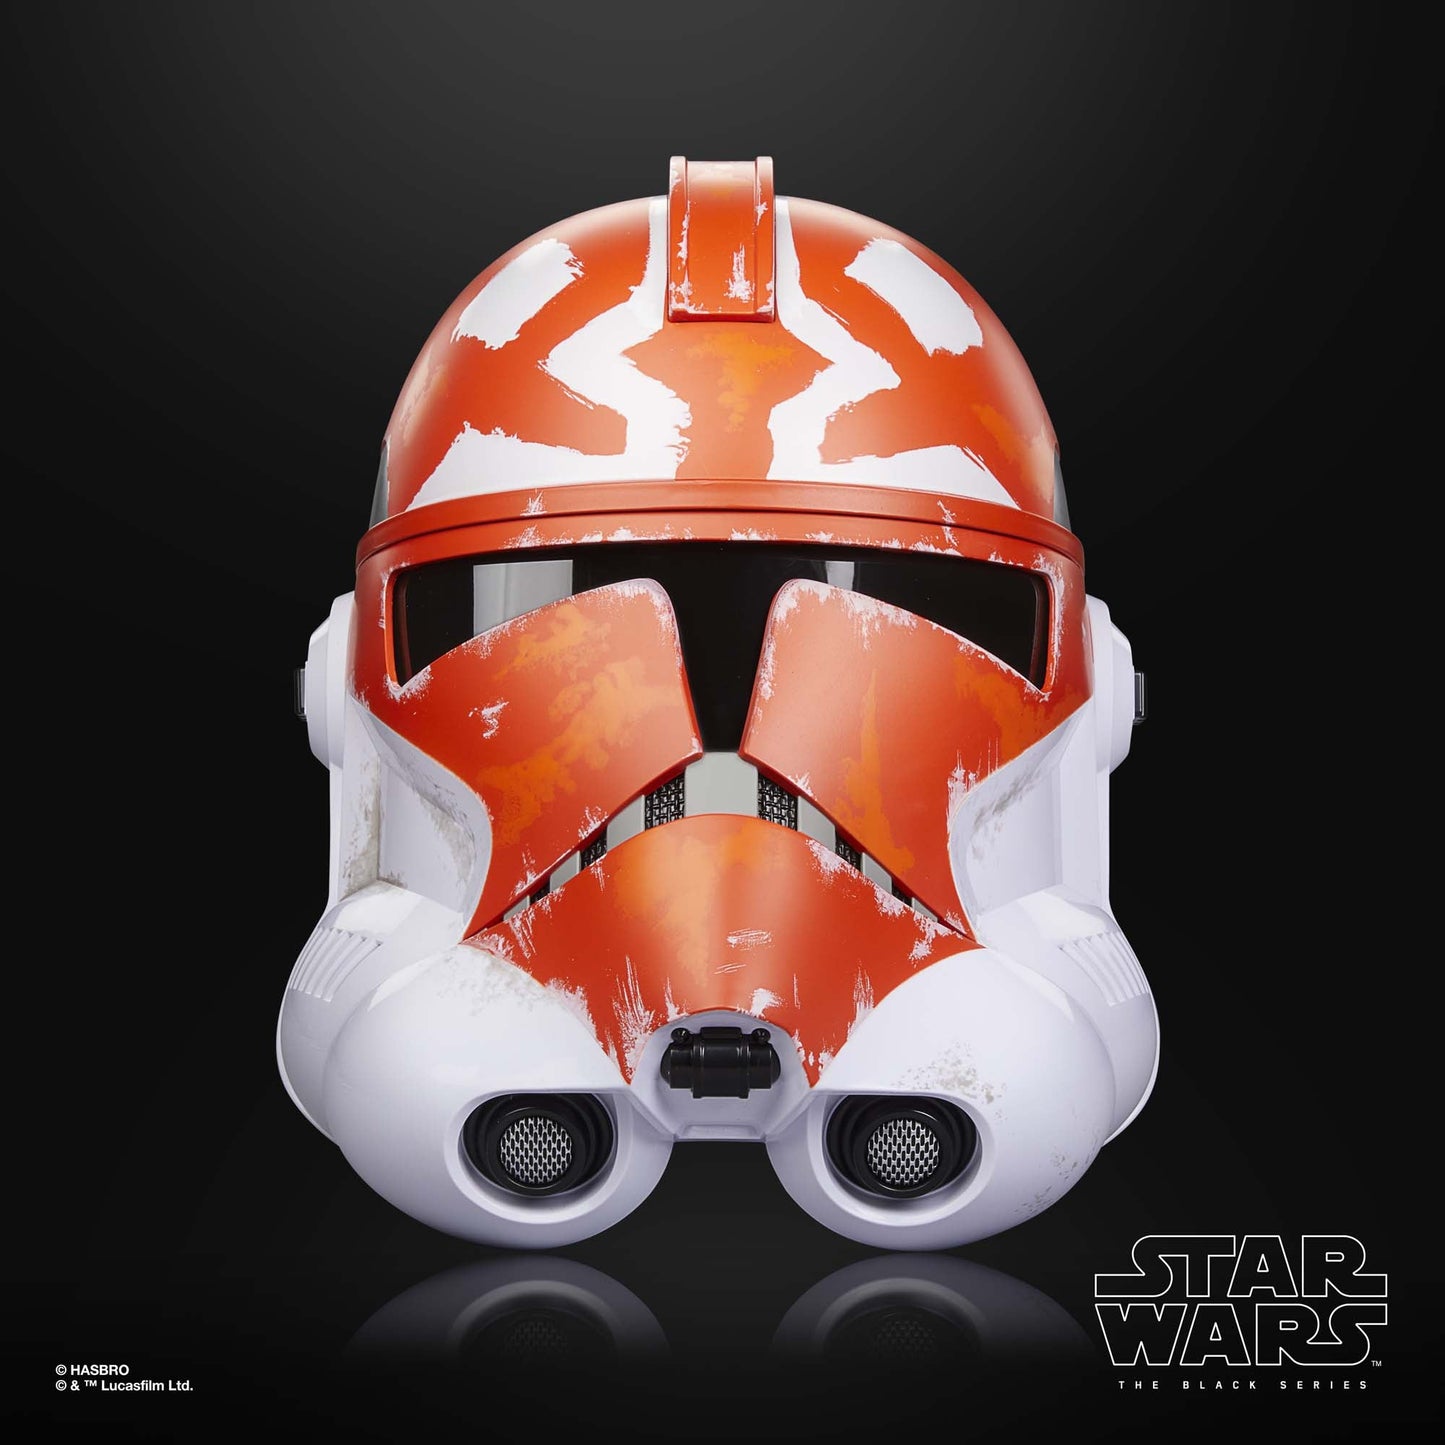 
                  
                    A premium full-scale Star Wars The Black Series Clone Trooper Helmet, adorned in the 332nd Ahsoka’s Clone Trooper design, features voice-changing technology to immerse fans in the Star Wars saga.
                  
                